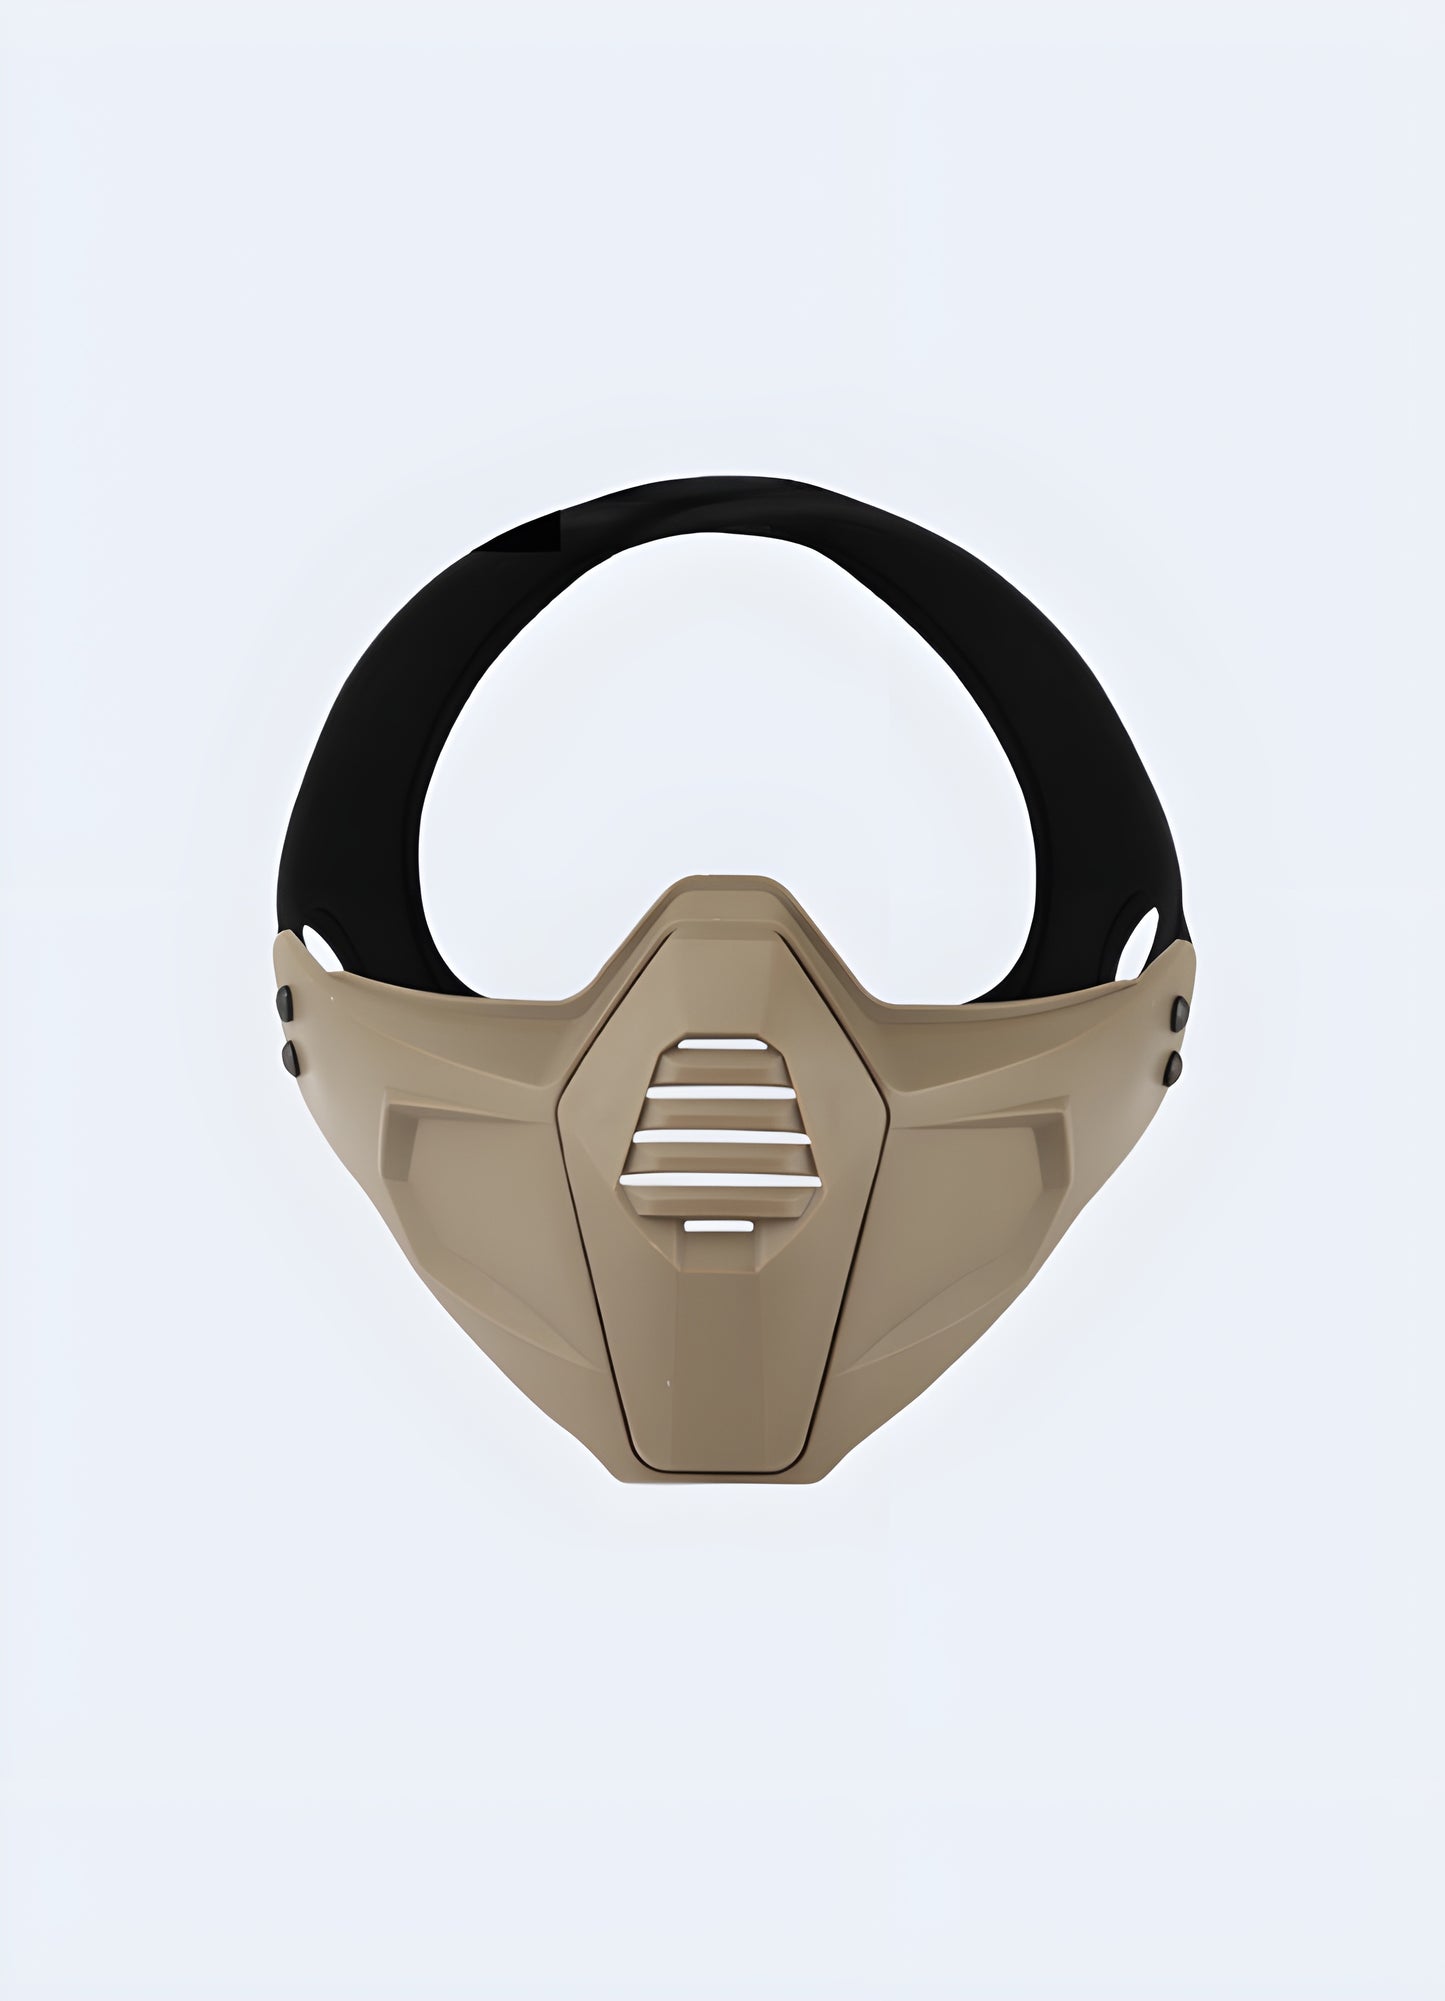 This mask adapts to all warriors, offering comfort and intimidation regardless of identity.